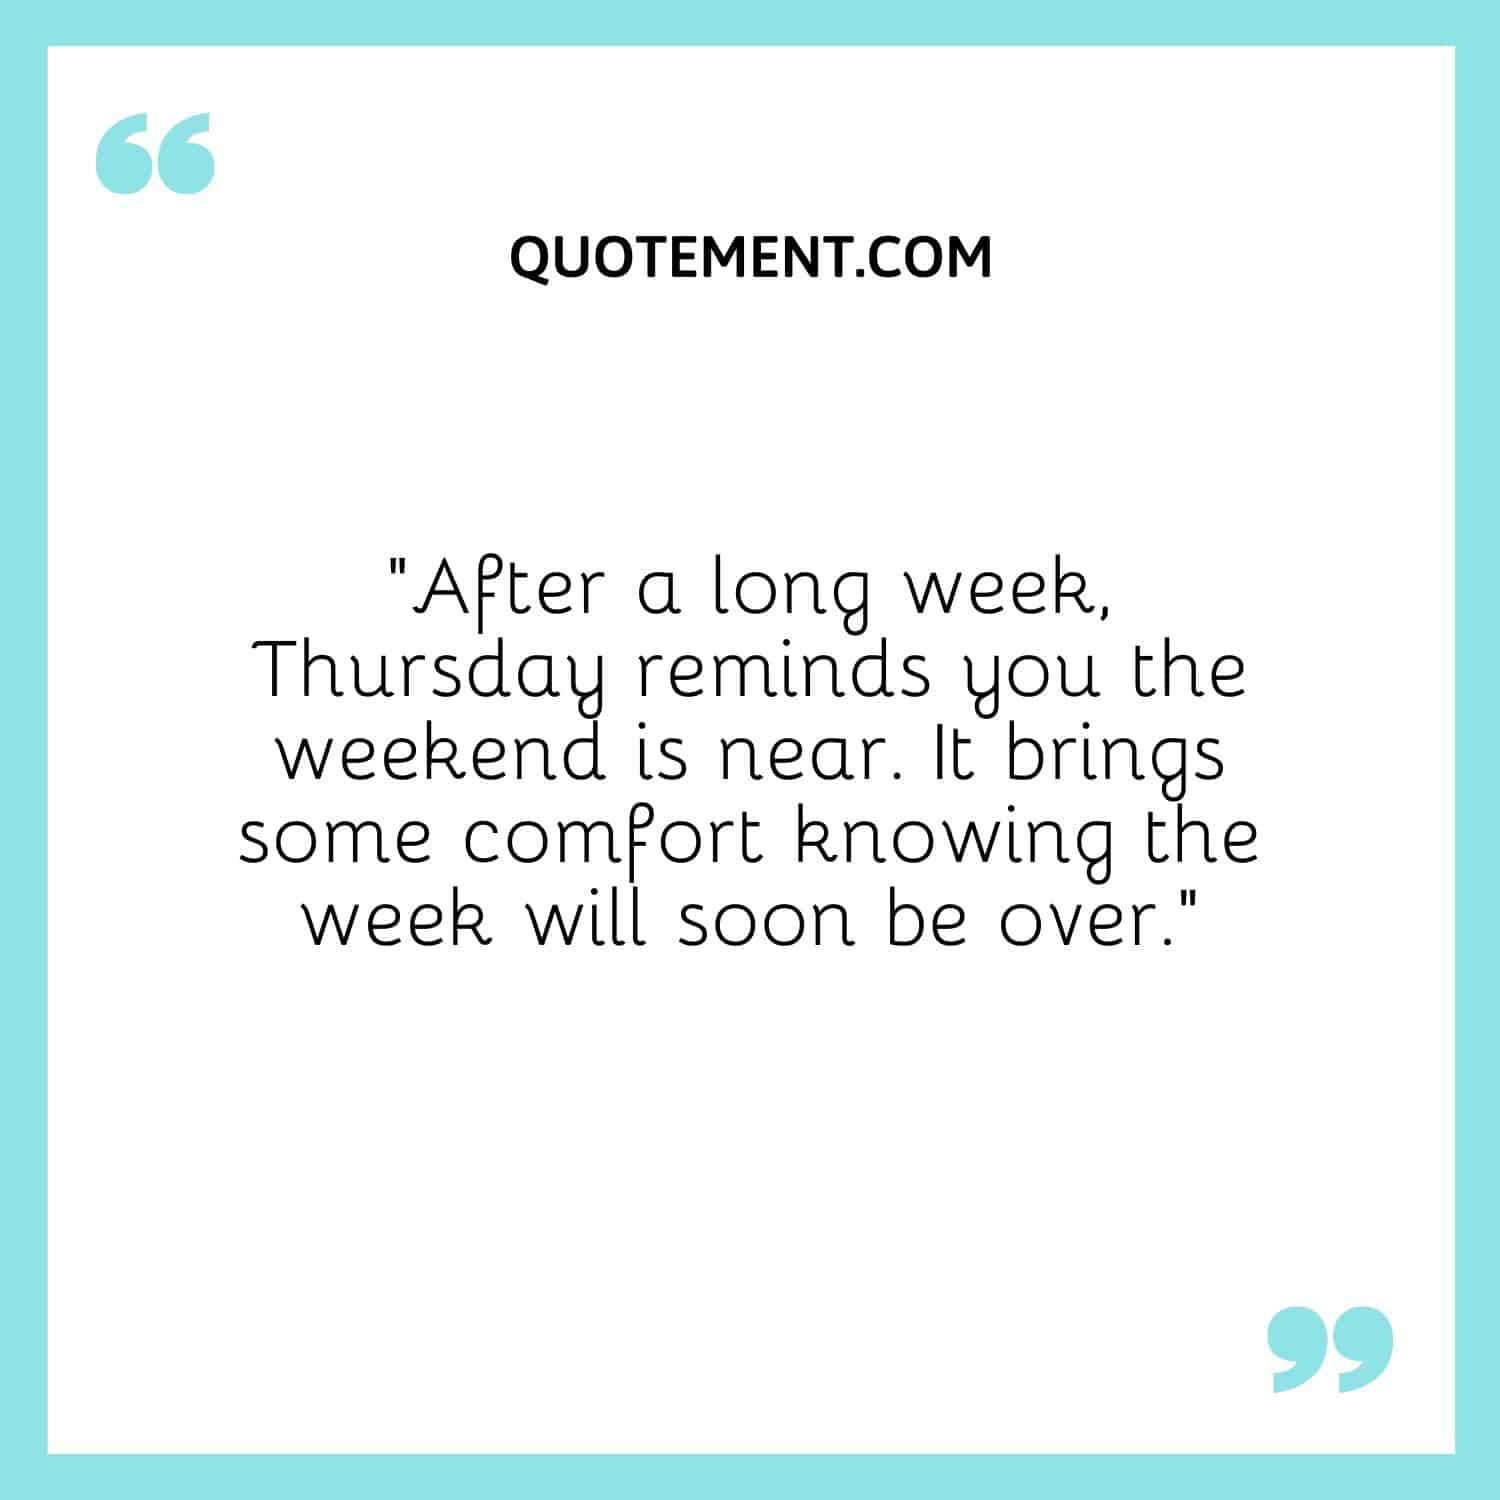 “After a long week, Thursday reminds you the weekend is near. It brings some comfort knowing the week will soon be over.”